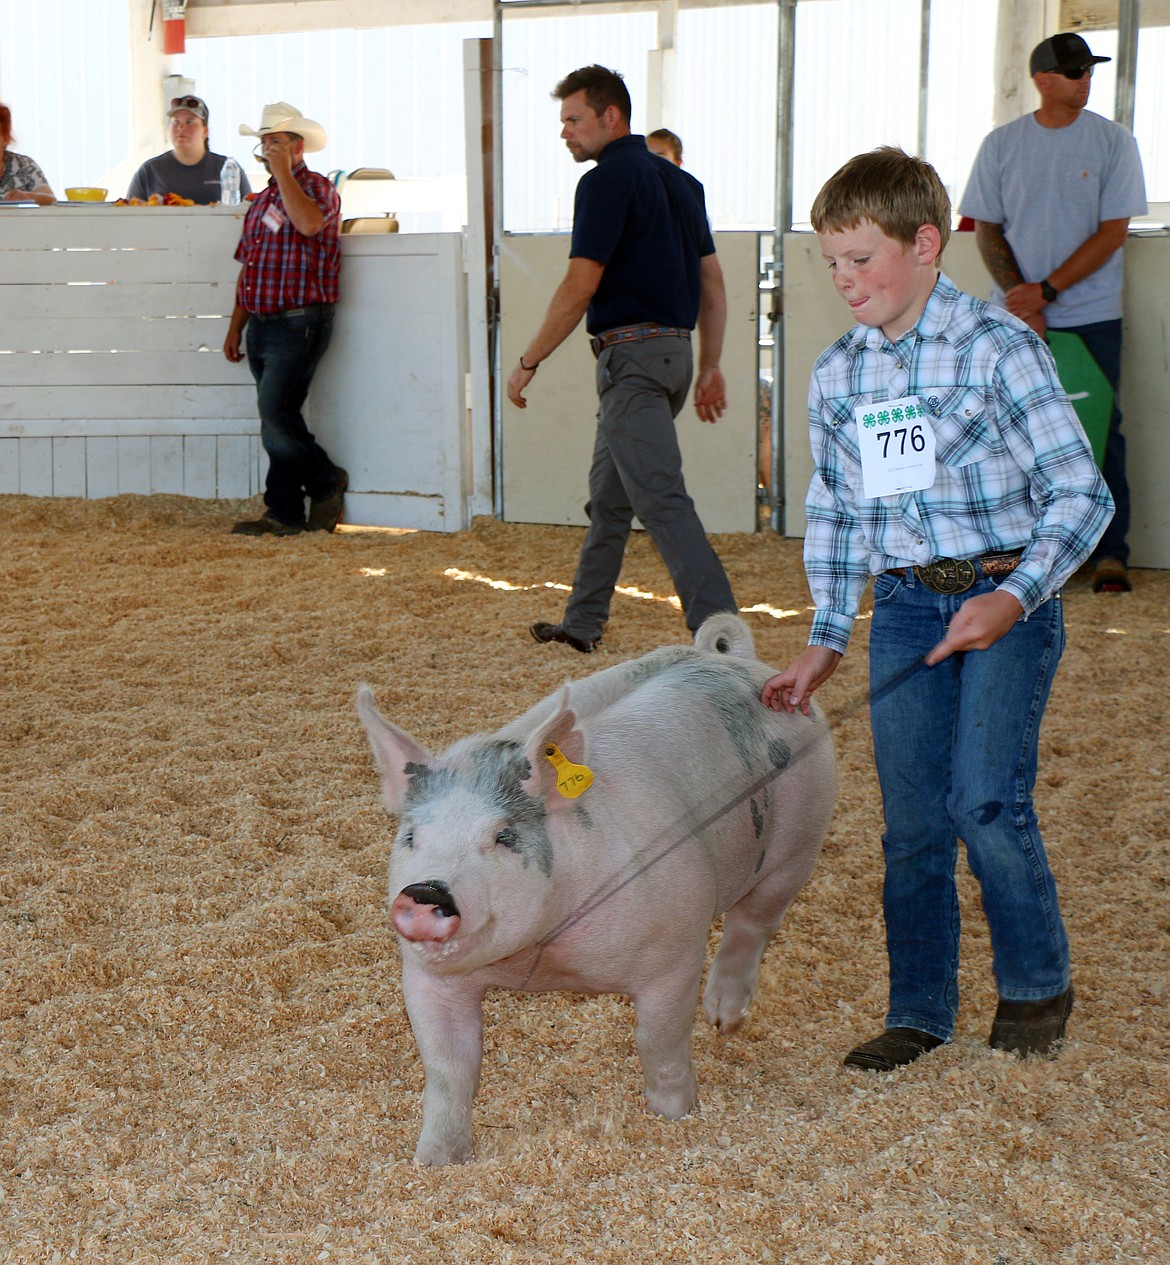 Easton Schmaltz of the Panhandle Pride Livestock 4-H Club shows his swine on Tuesday.